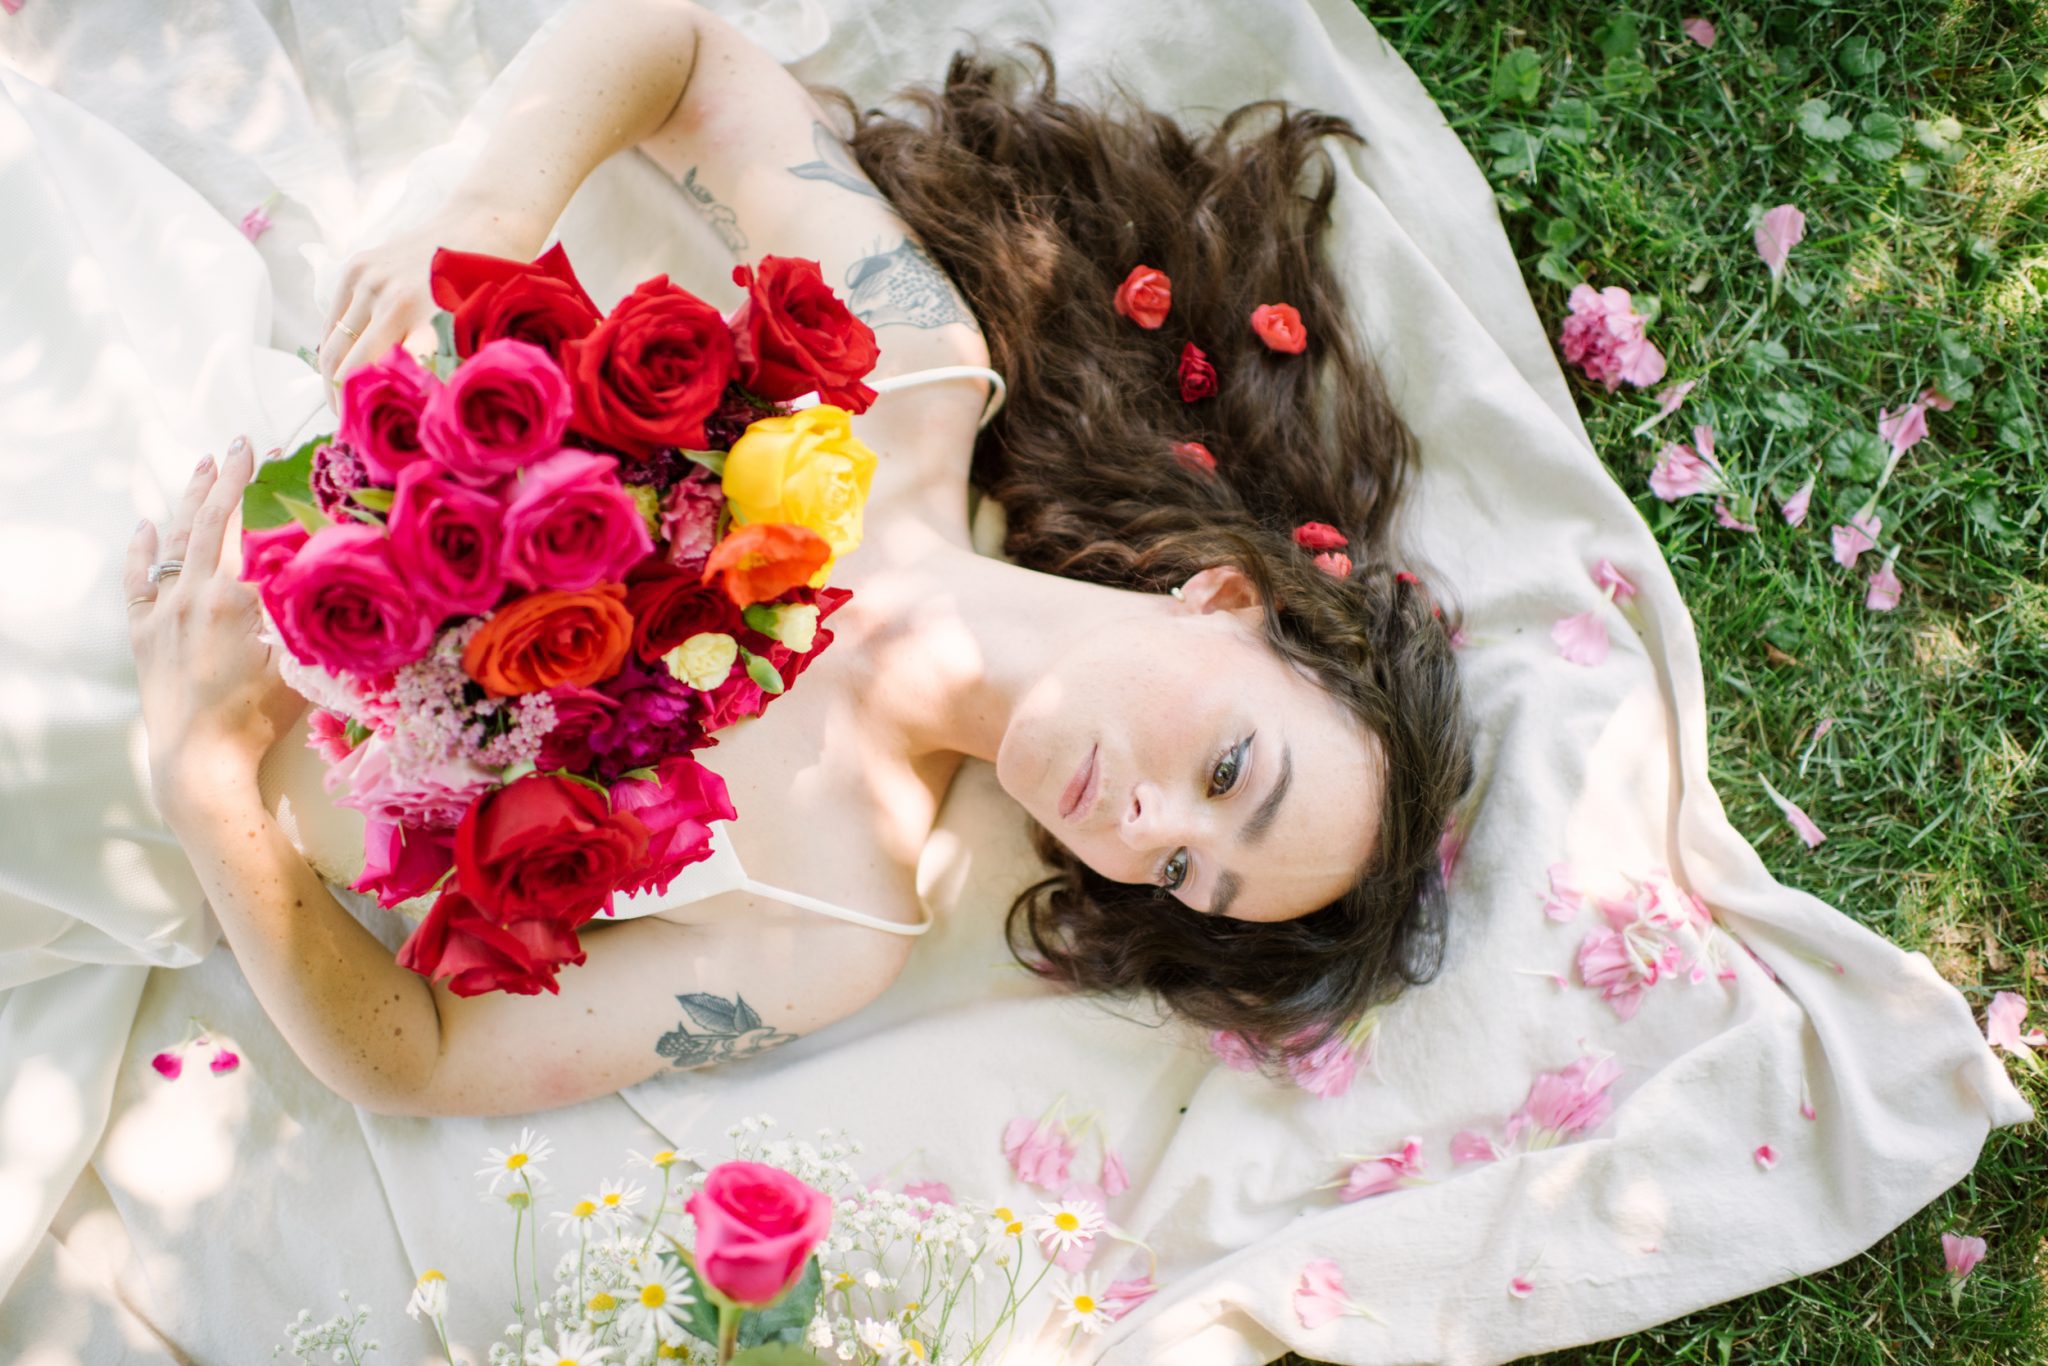 Hot Pink Perfection for this Picnic in the Park Valentine's Day Inspiration Featured by Brontë Bride, bed or roses, Valentine's Day Inspiration